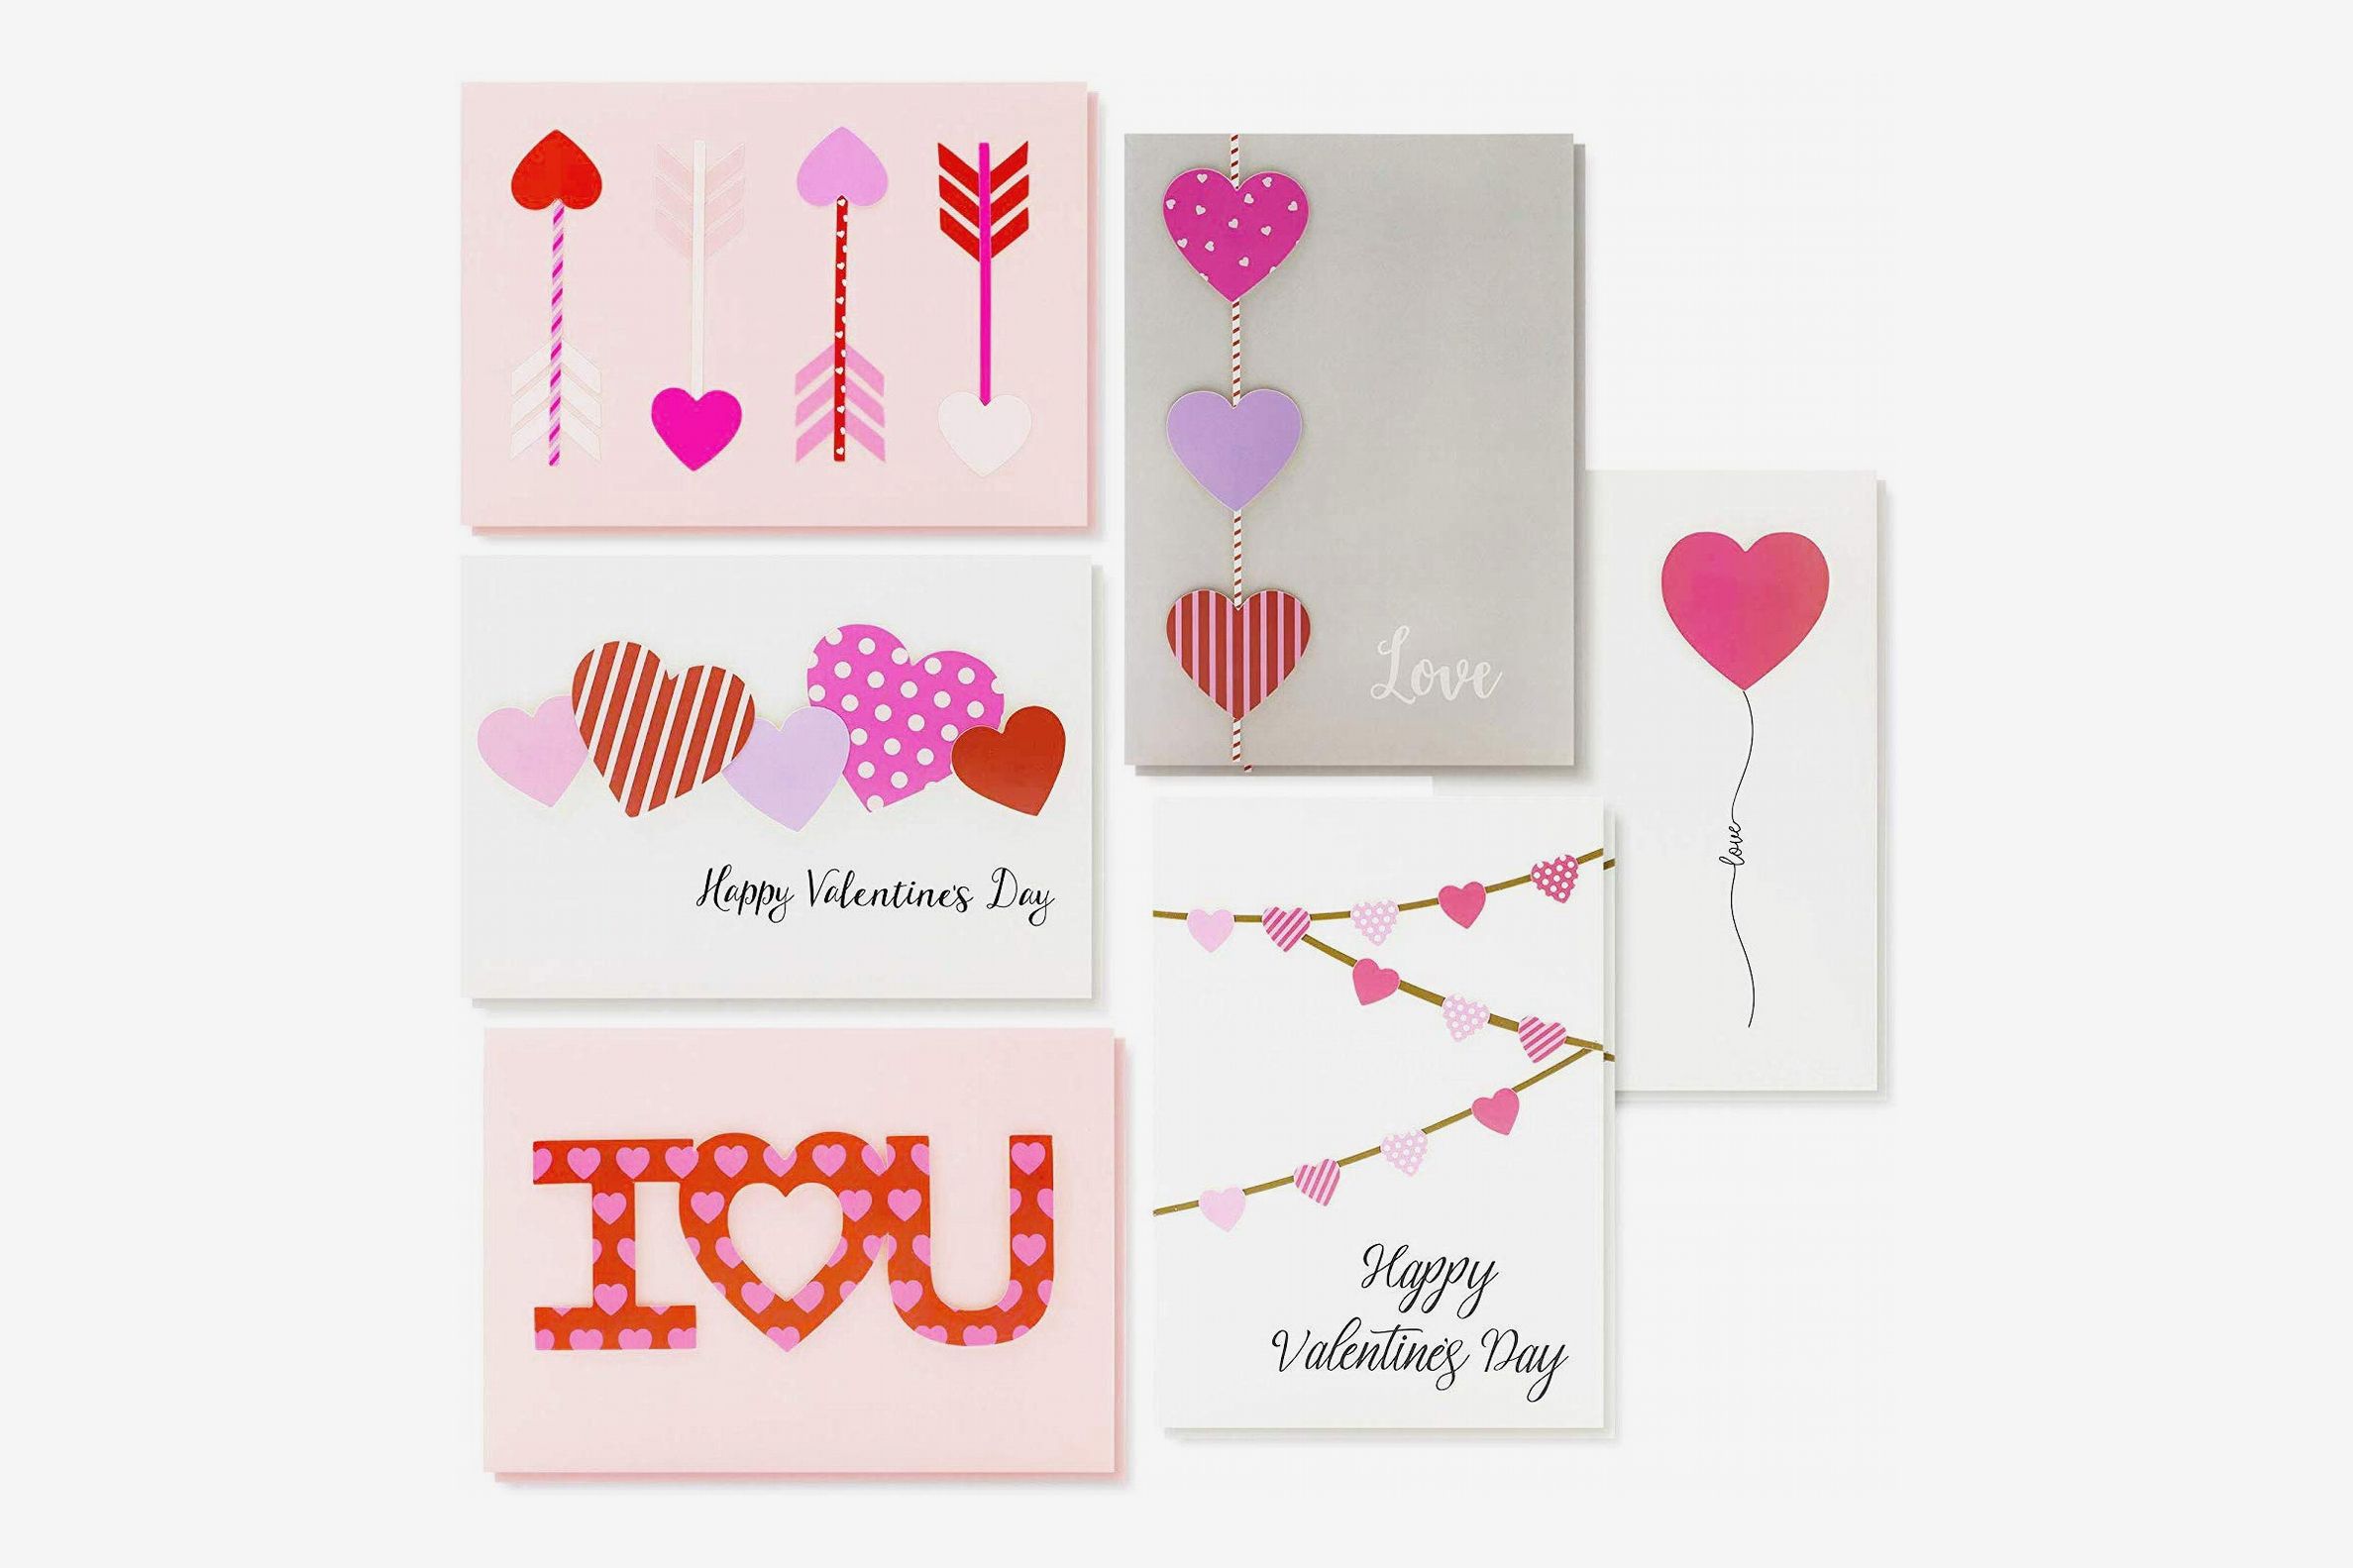 50 Thoughtful Handmade Valentines Cards  Valentines day cards diy, Valentine  cards handmade, Diy valentines cards